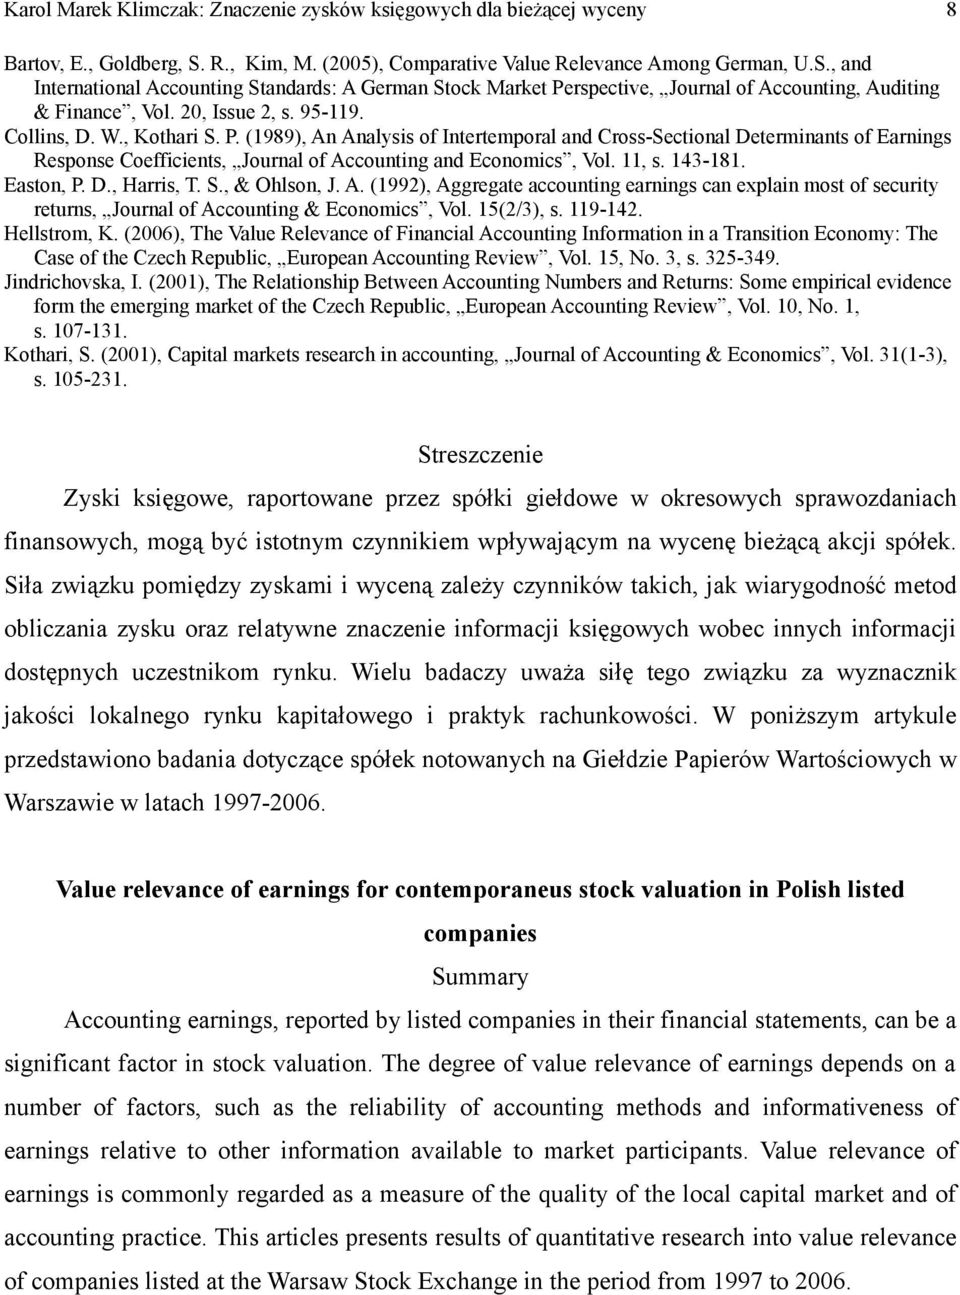 20, Issue 2, s. 95-119. Collins, D. W., Kothari S. P. (1989), An Analysis of Intertemporal and Cross-Sectional Determinants of Earnings Response Coefficients, Journal of Accounting and Economics, Vol.